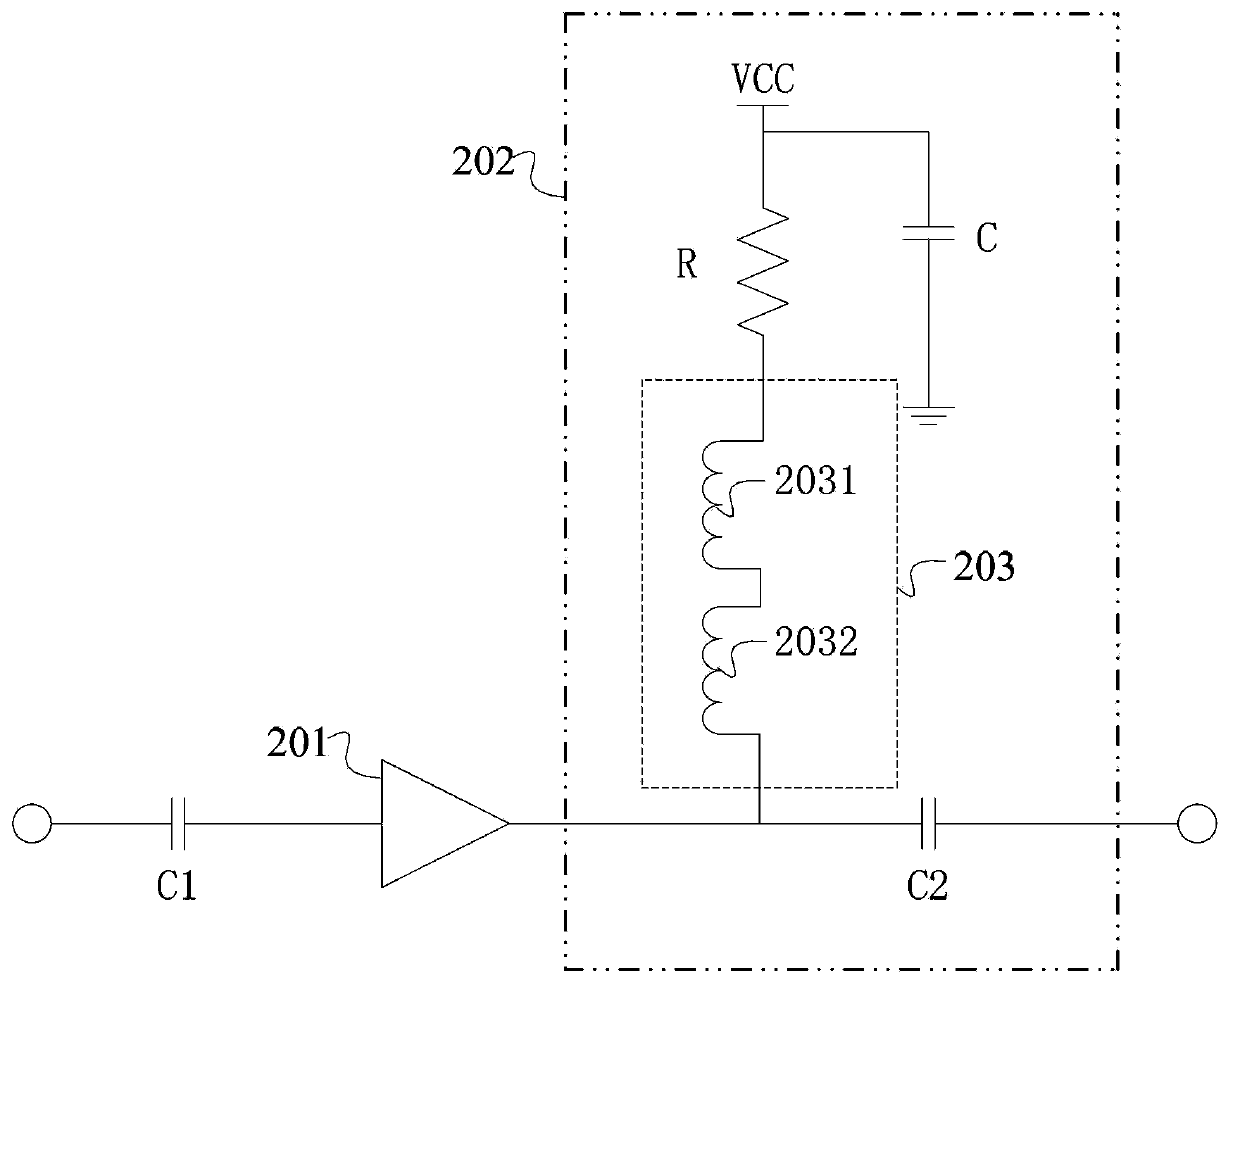 Radio frequency measurement device with amplifier